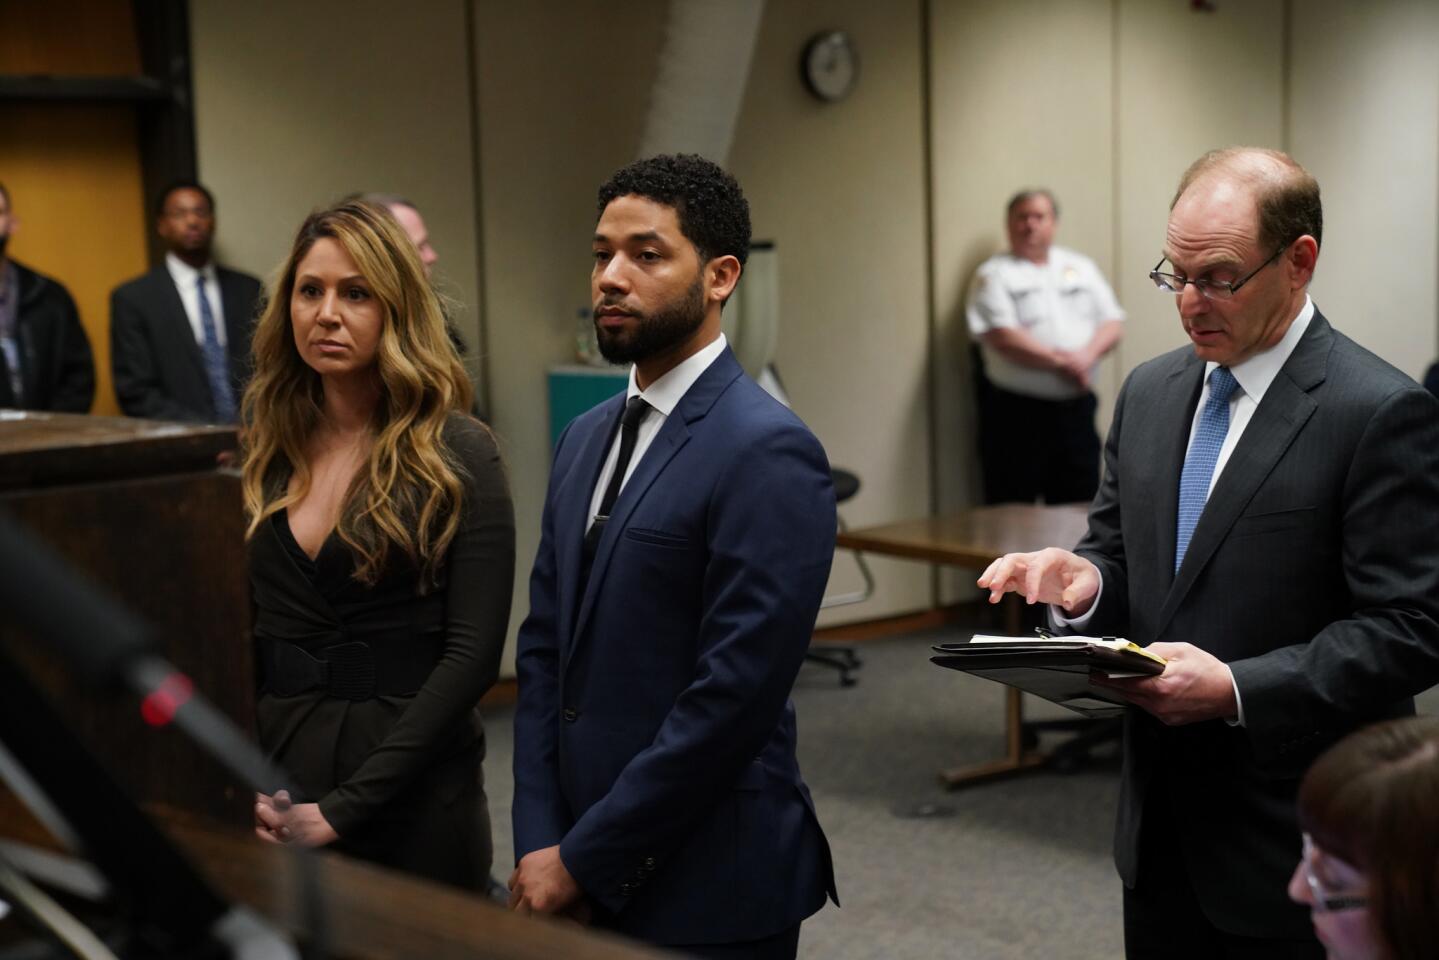 Actor Jussie Smollett appears for a hearing at the Leighton Criminal Court Building on March 14, 2019.